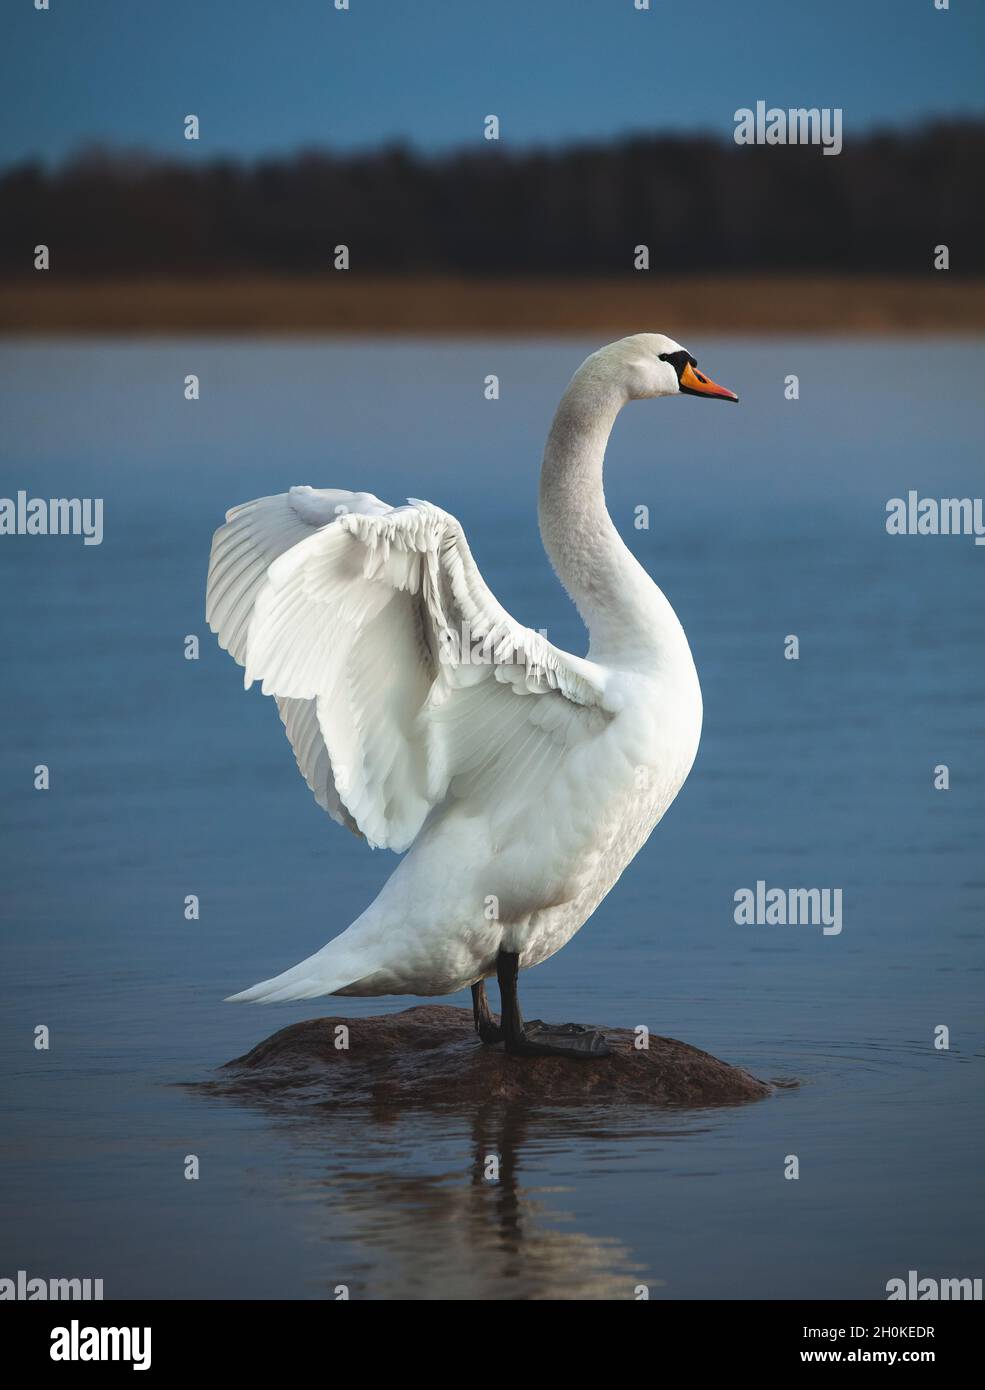 Mute swan on a rock in blue water and stretching its neck, wings spread. Cygnus olor. Stock Photo